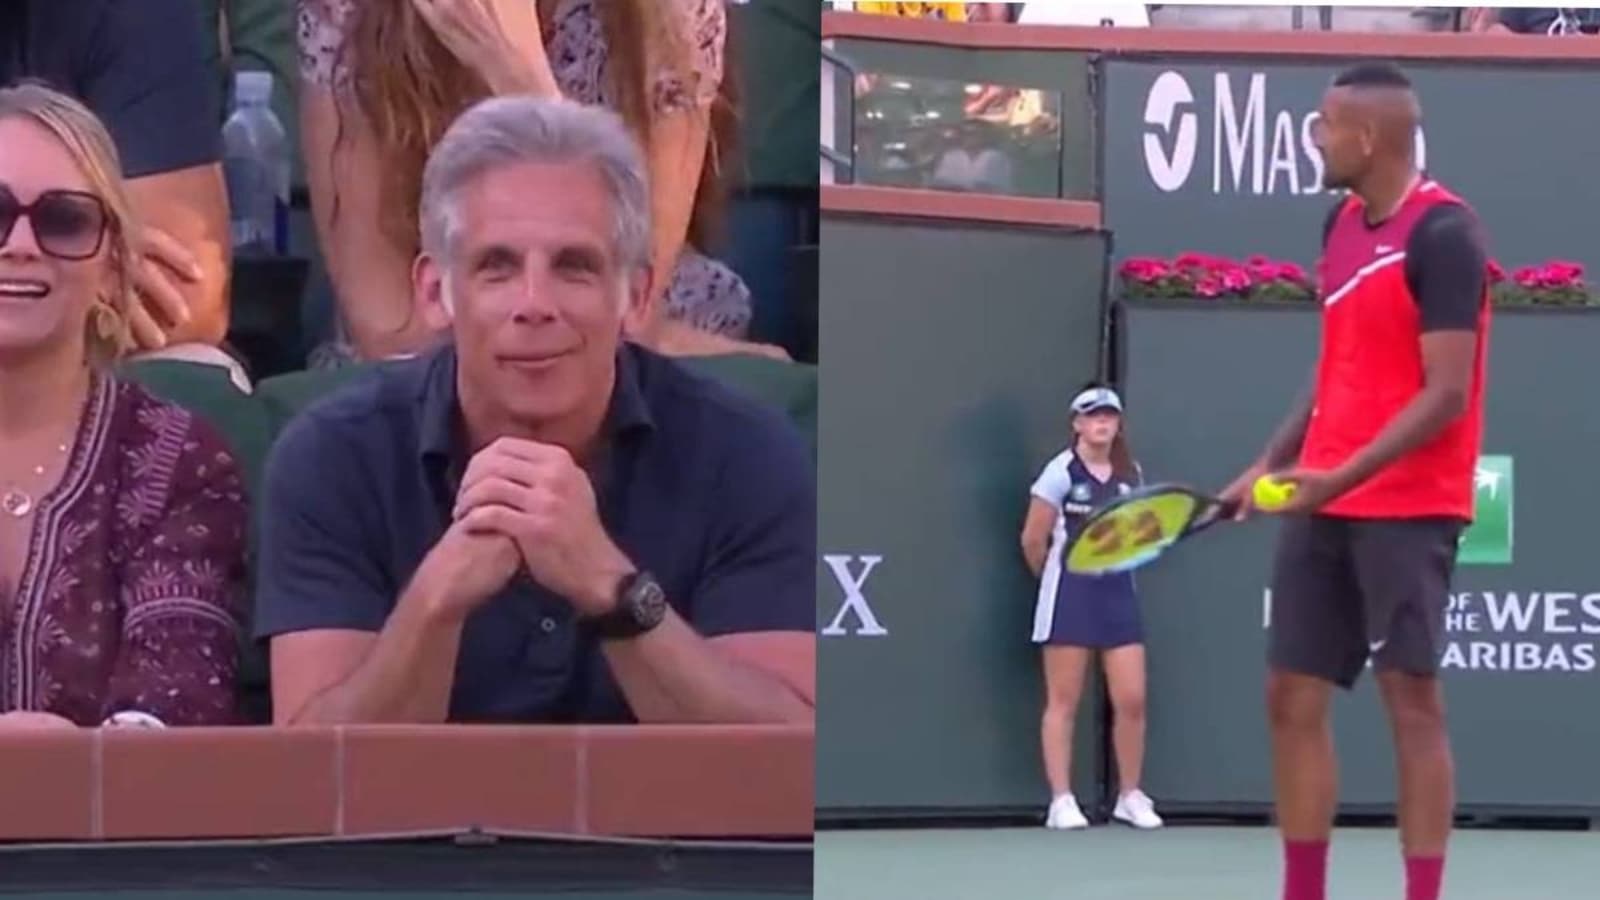 Kyrgios shuts unruly fan with Ben Stiller statement during Nadal match - Watch Tennis News